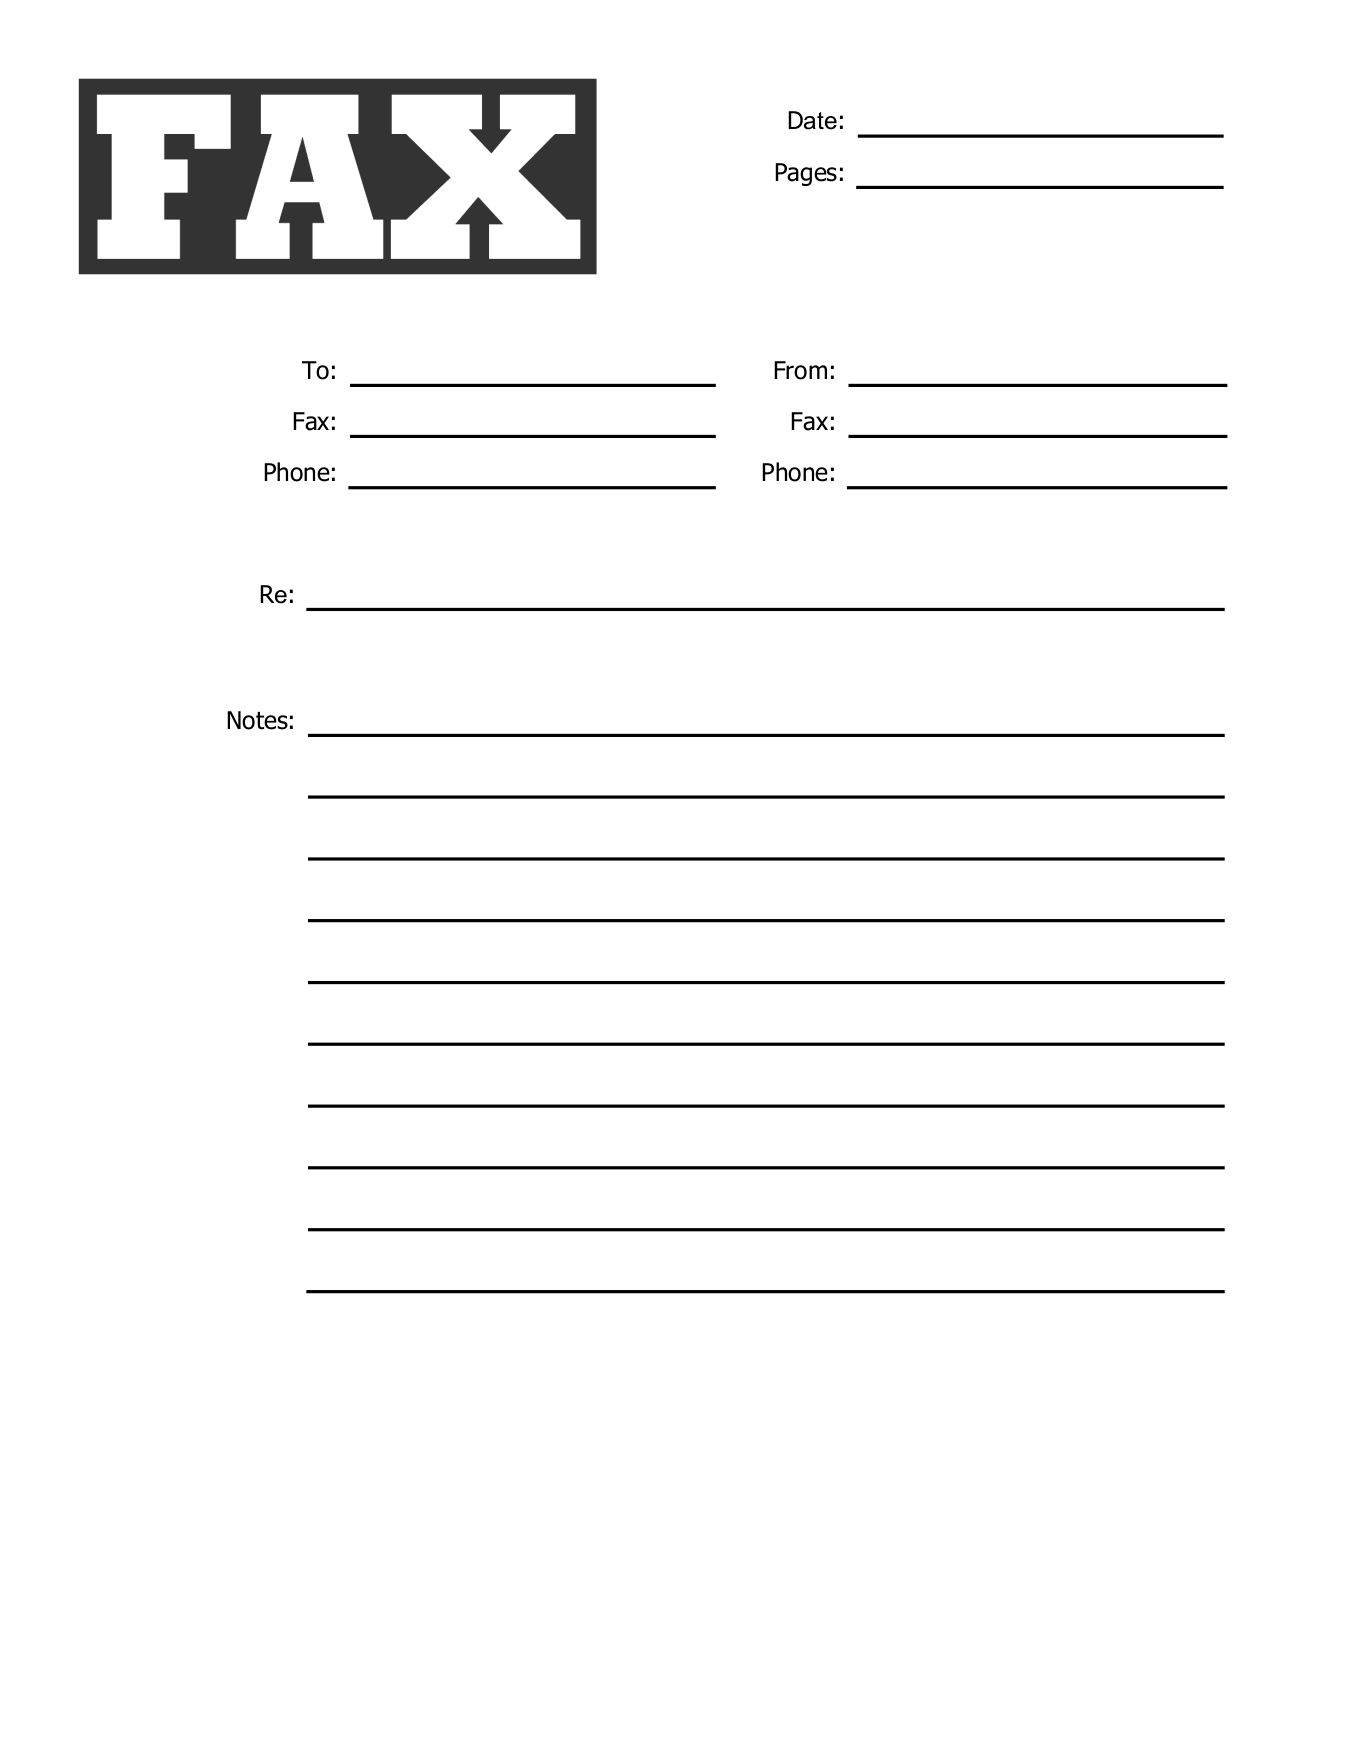 blank cover letter for fax